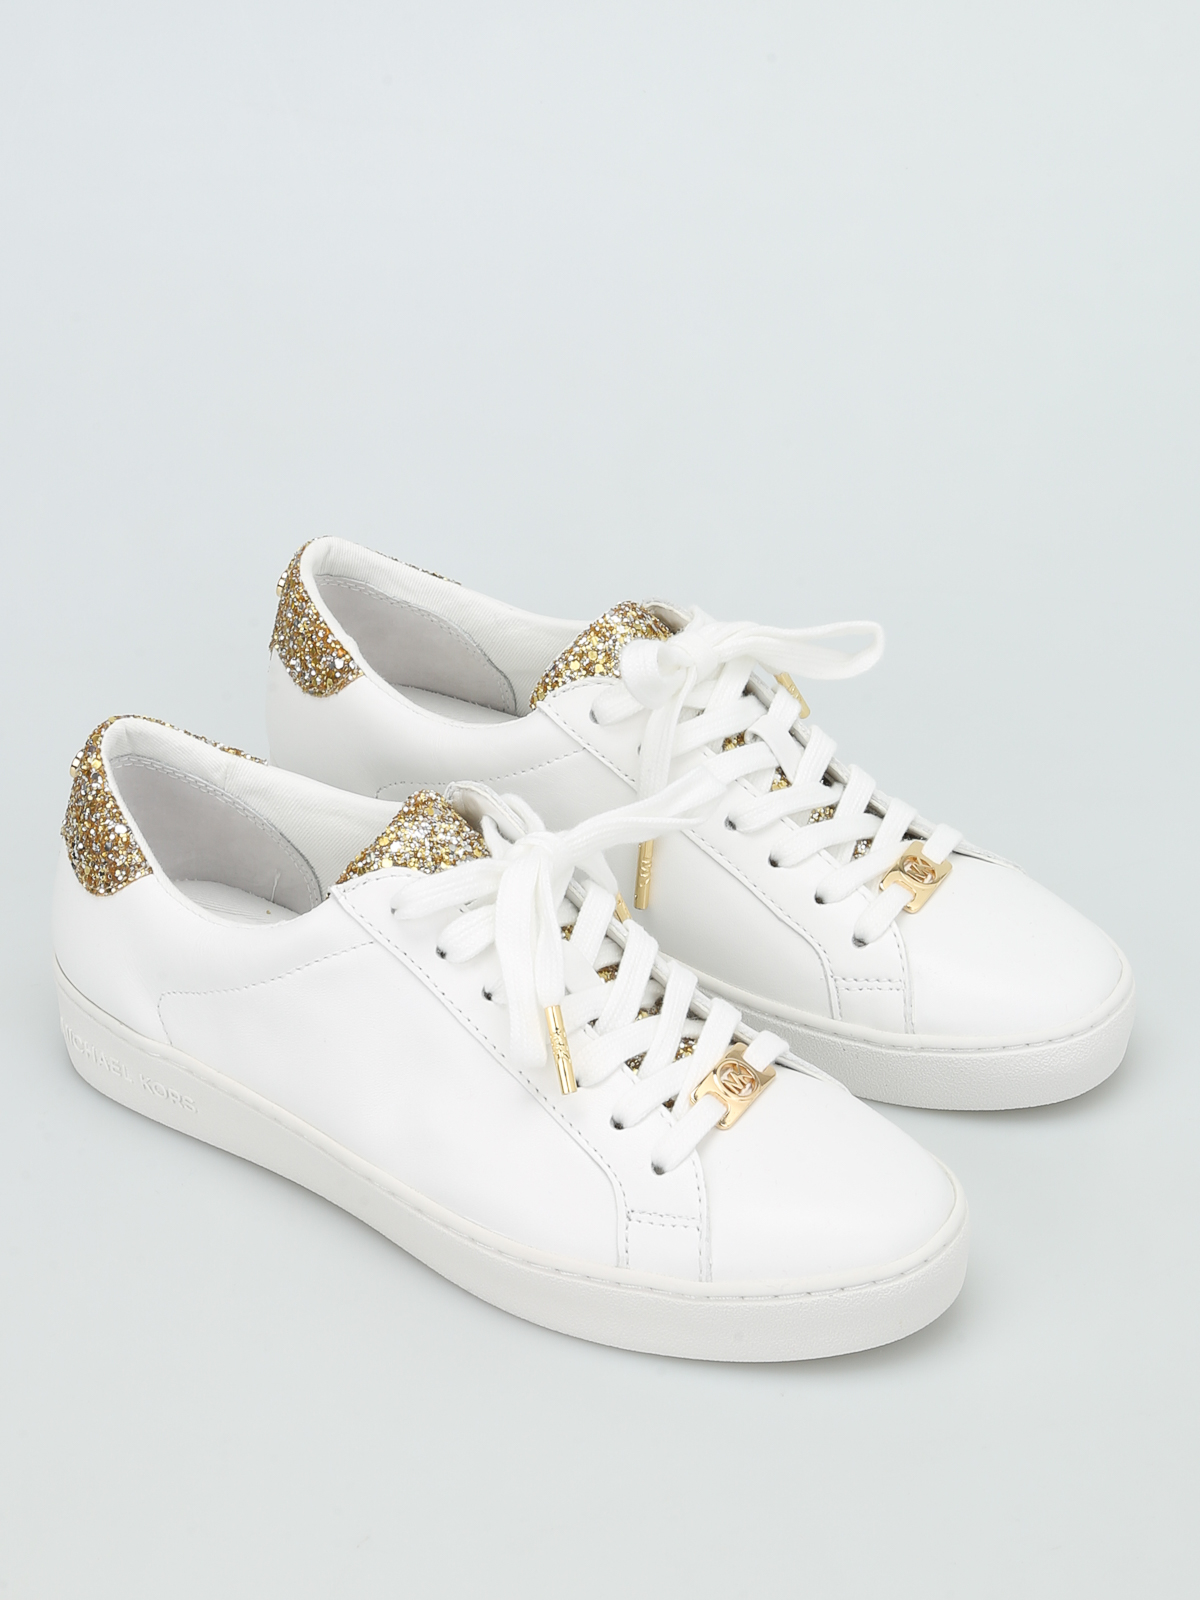 MICHAEL MICHAEL KORS IRVING LACE UP  White Womens Sneakers  YOOX